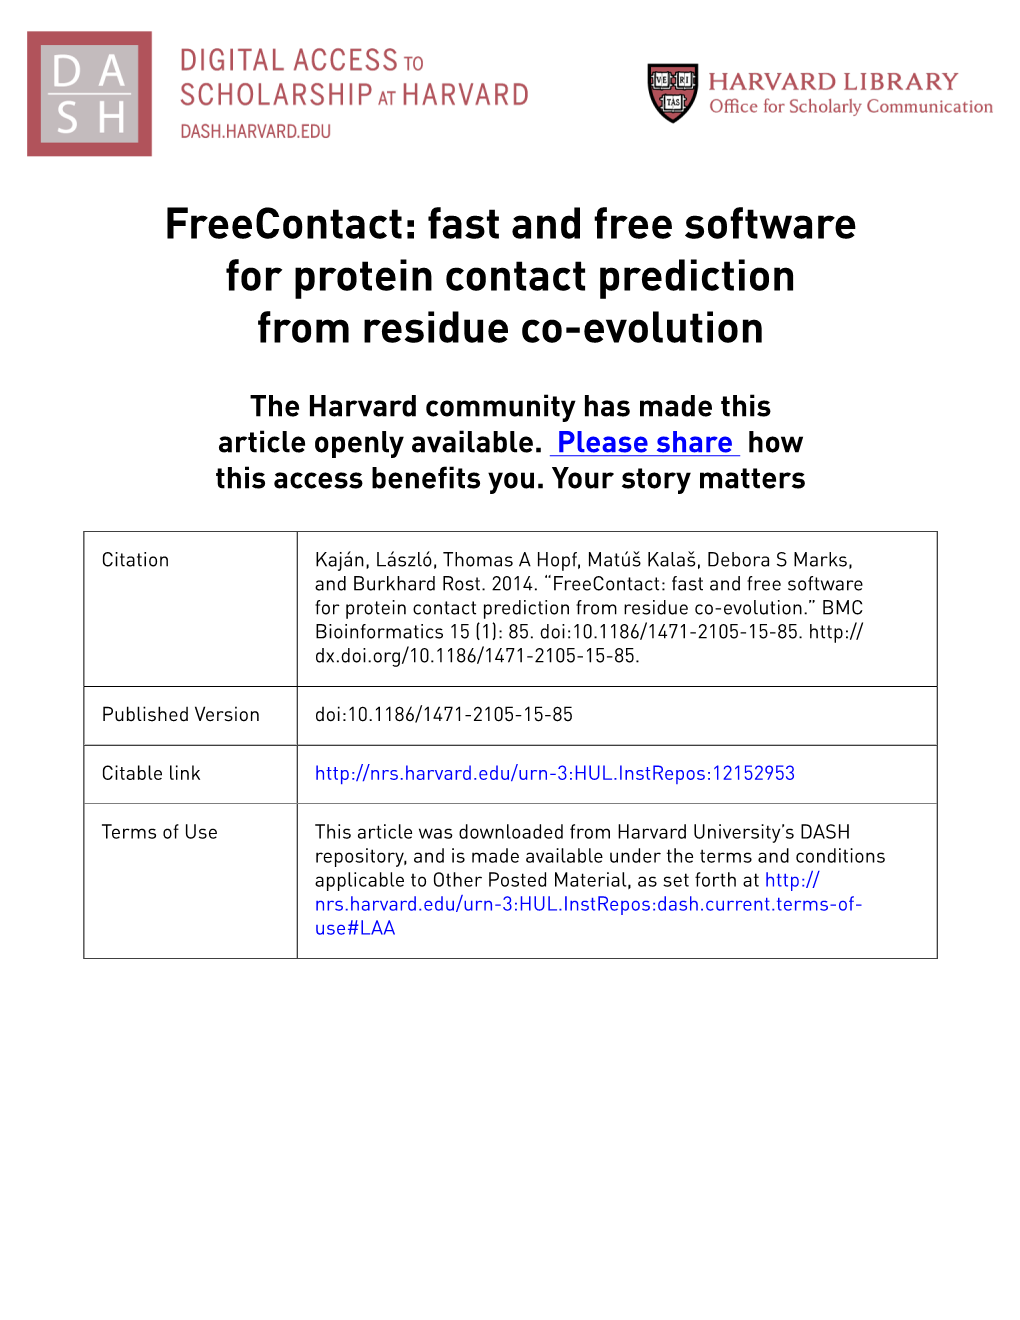 Fast and Free Software for Protein Contact Prediction from Residue Co-Evolution